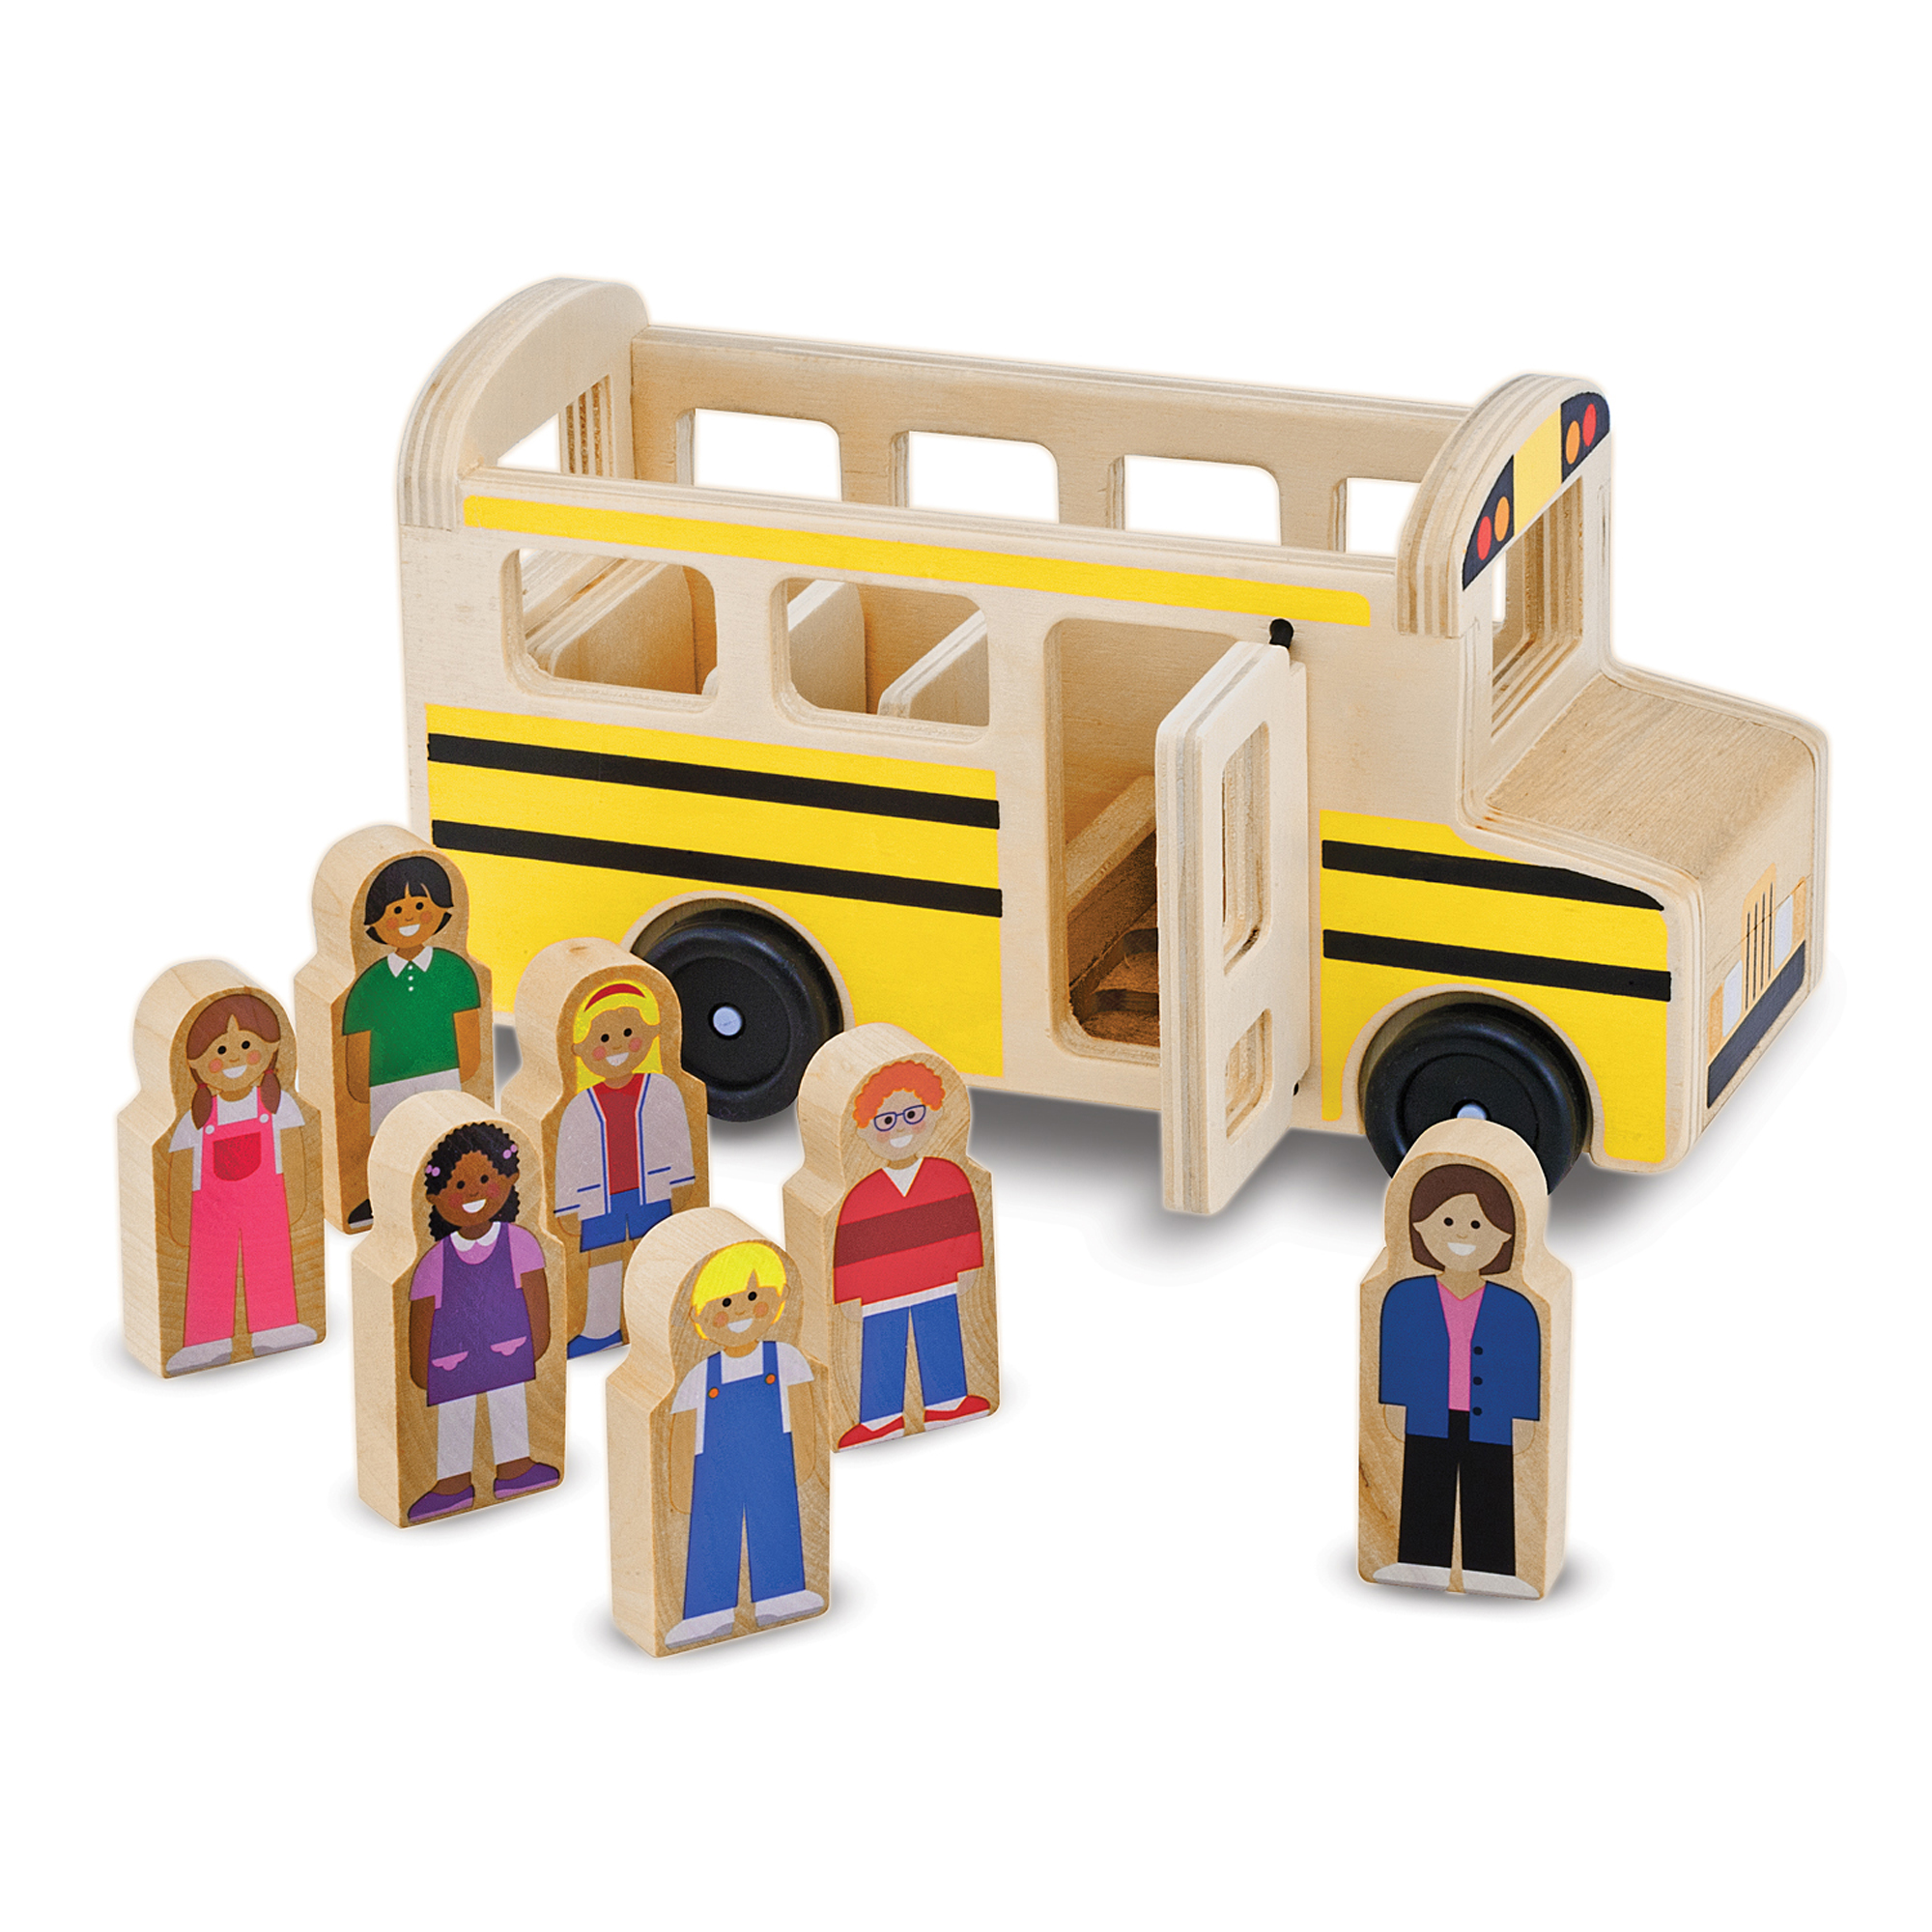 Melissa & Doug School Bus Wooden Play Set With 7 Play Figures - image 1 of 9